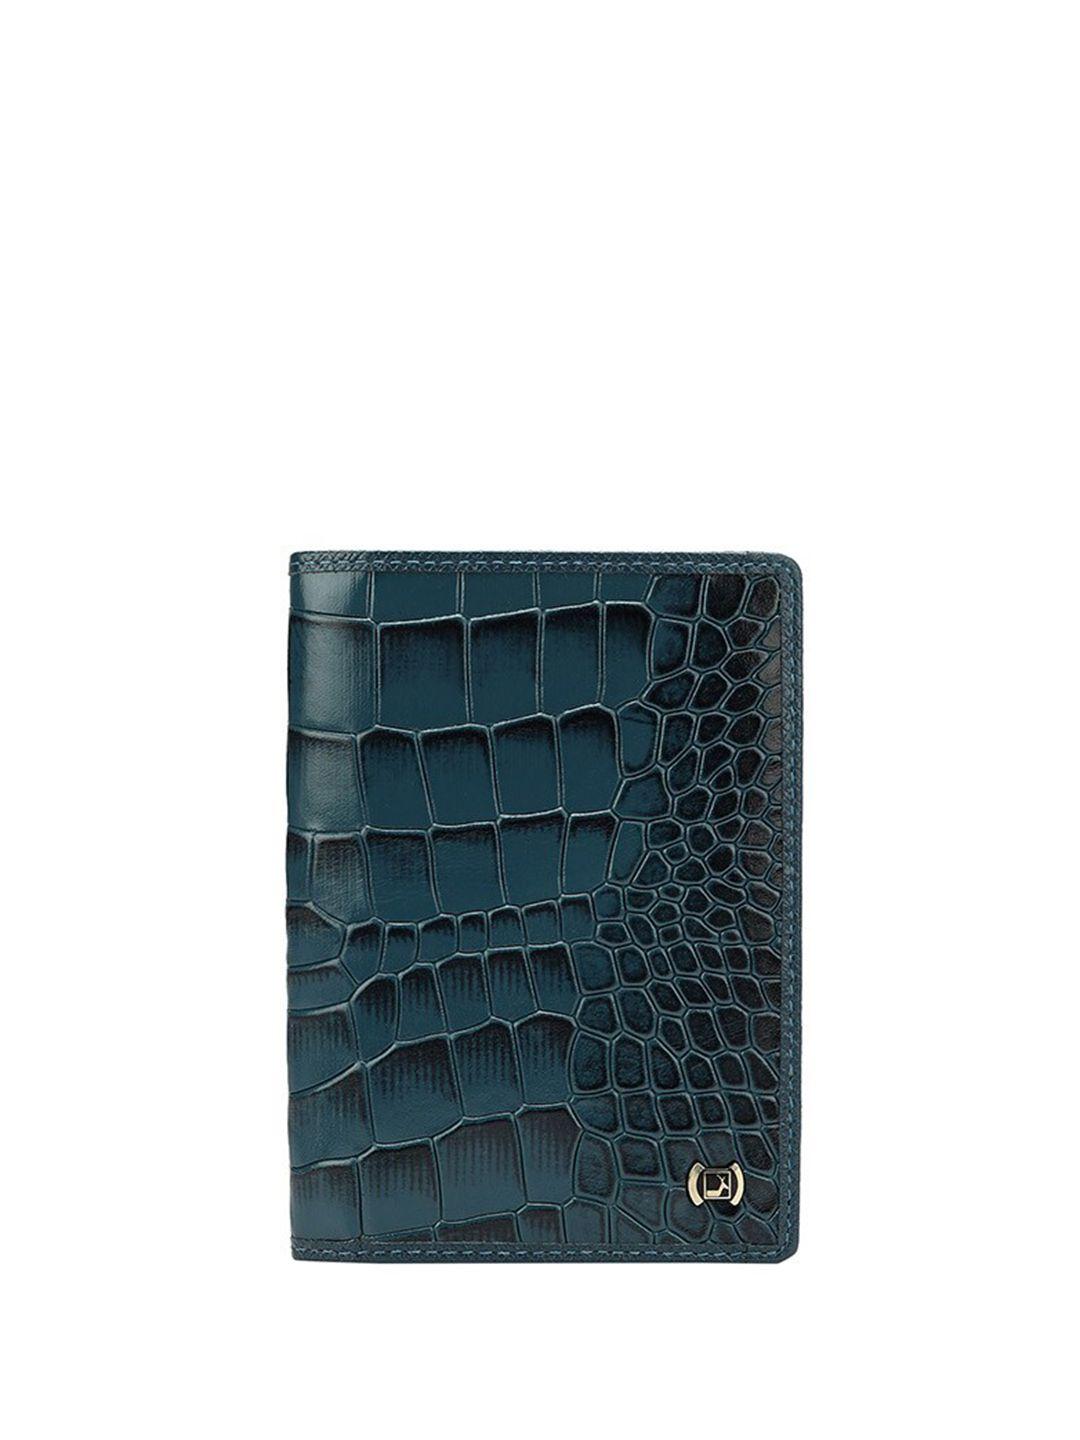 da milano unisex blue abstract textured leather two fold wallet with passport holder